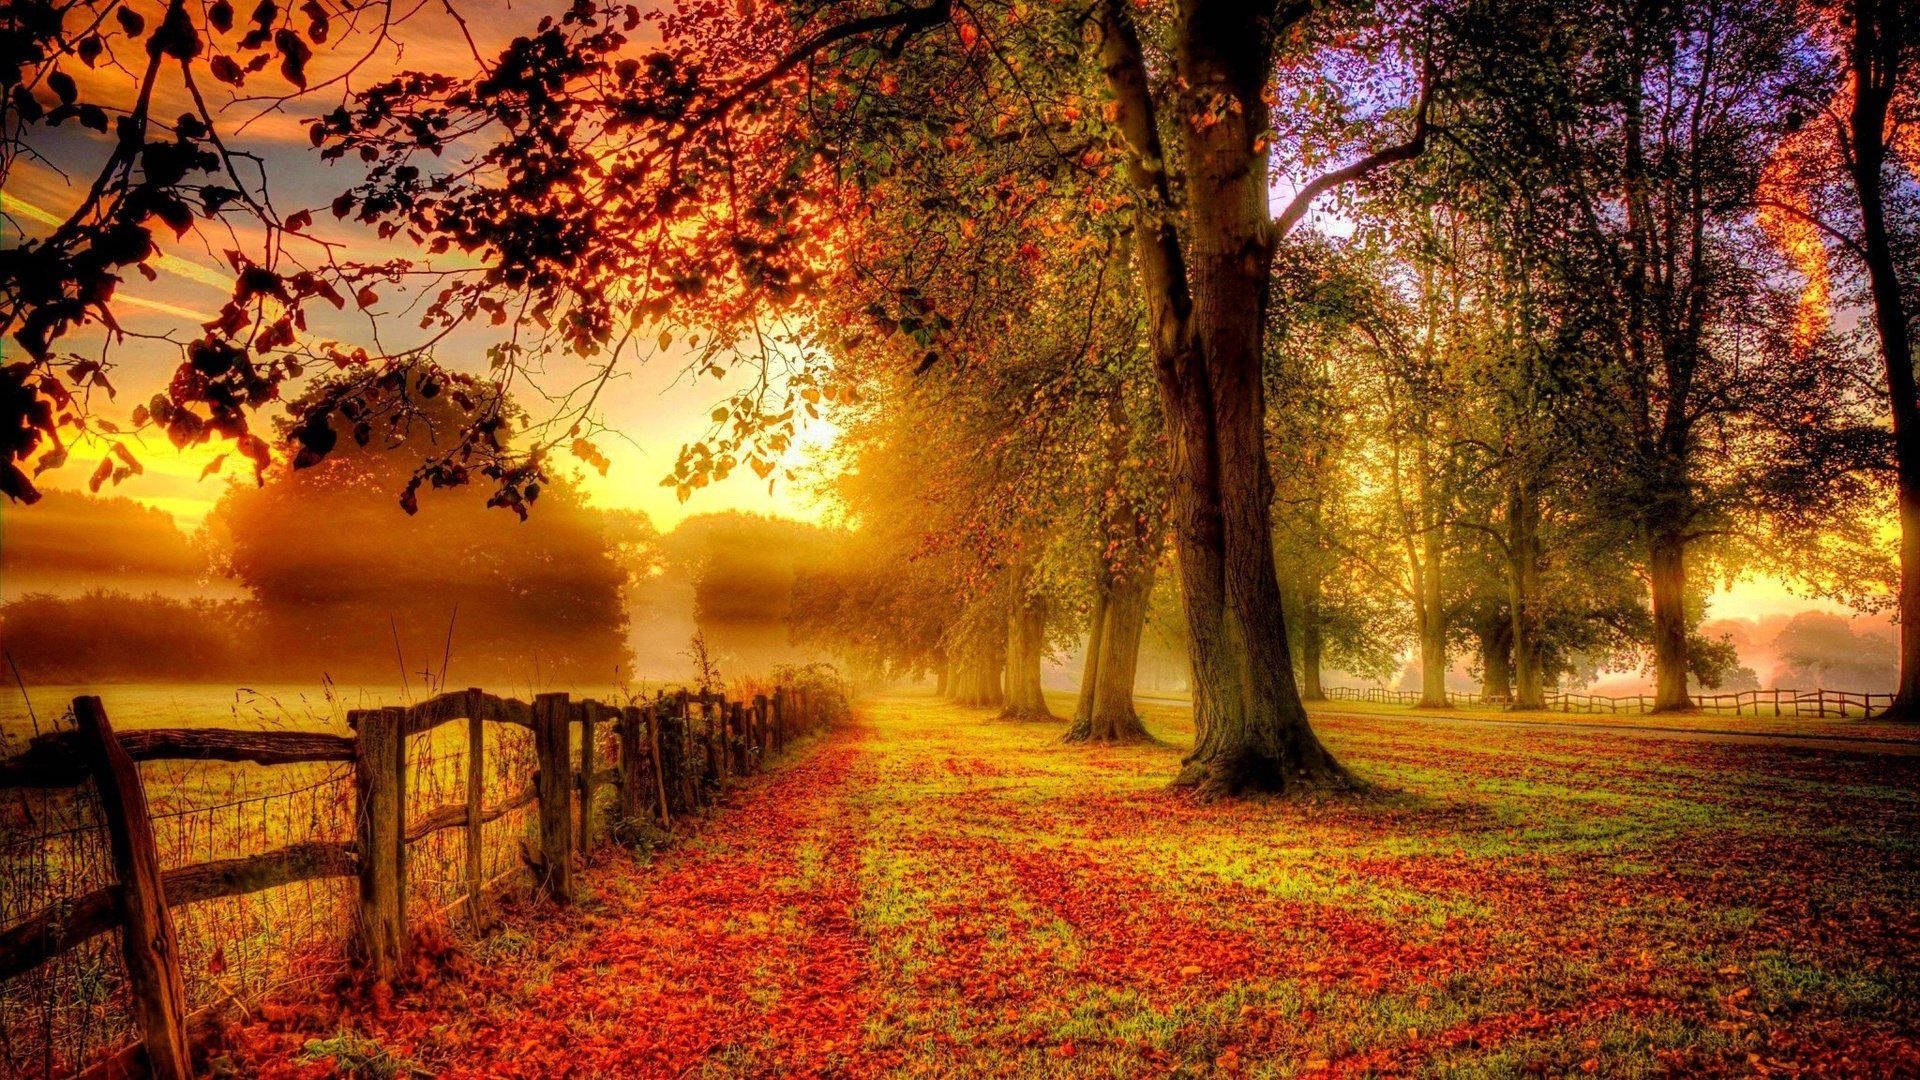 Get Lost In The Beauty Of Nature At Fall Farm! Wallpaper